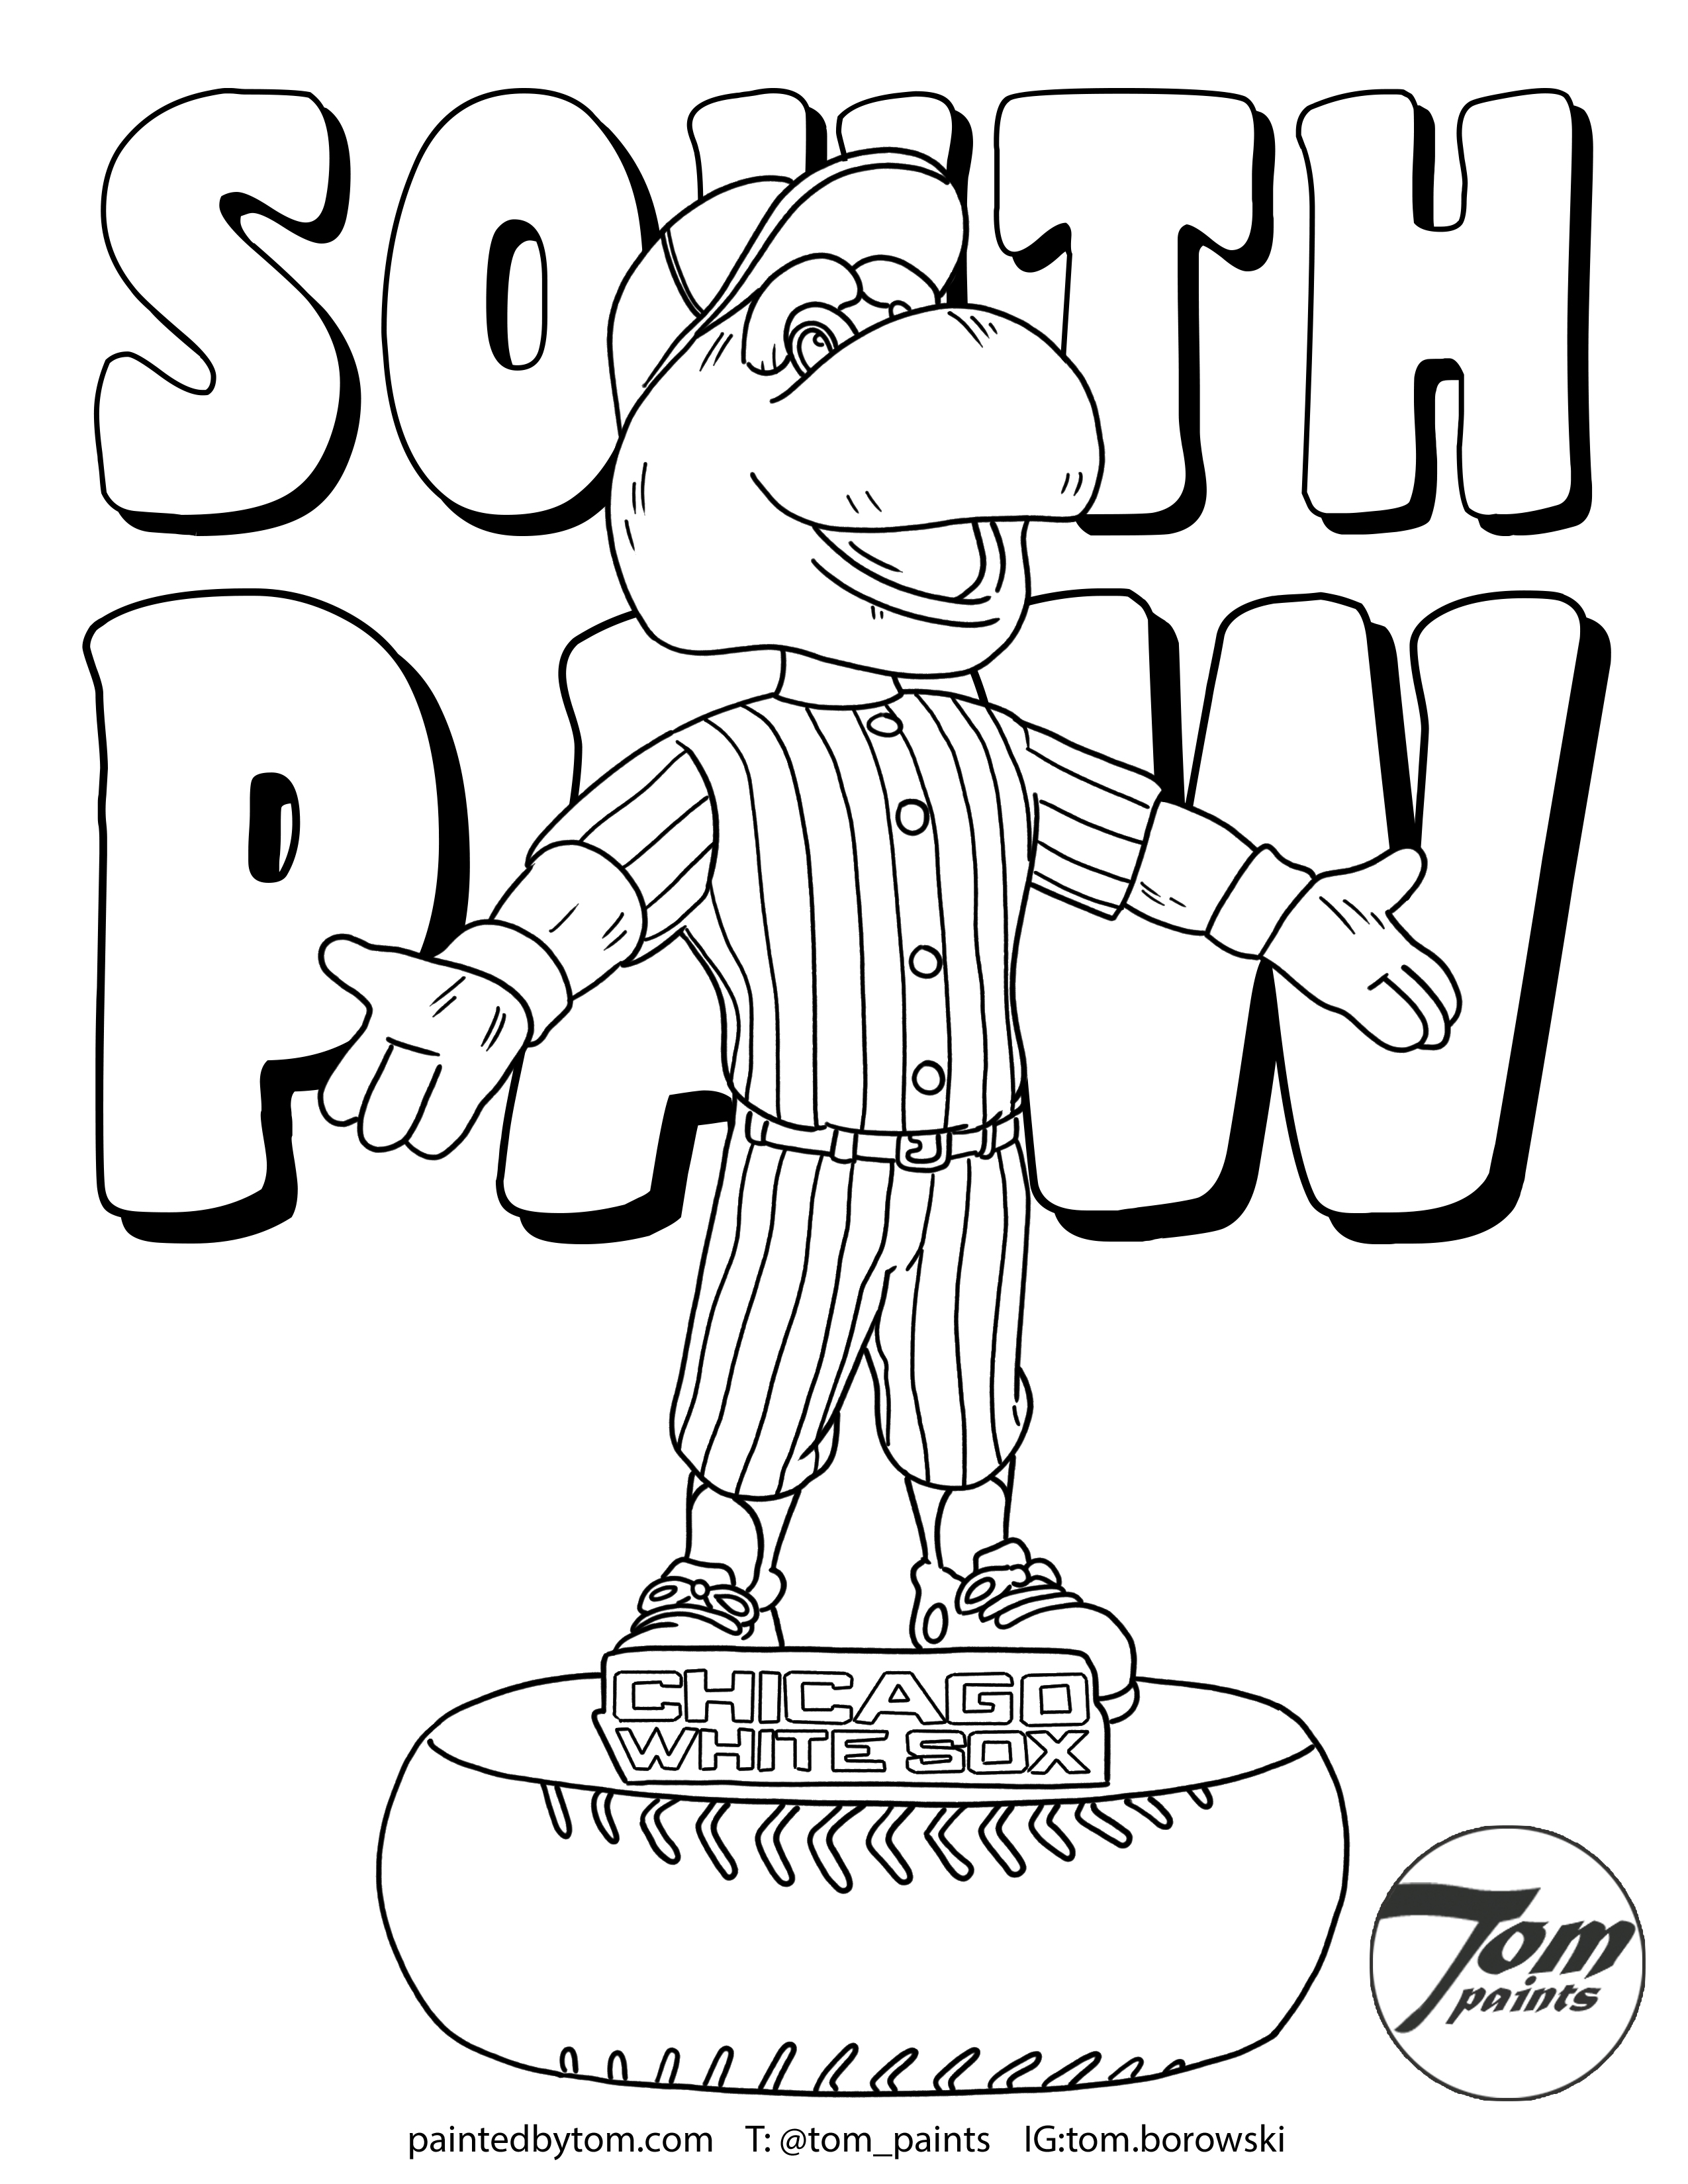 Tompaints on x for any of you with kids or just want to pass the time by coloring here are some coloring book pages i made based on white sox bobbleheads if